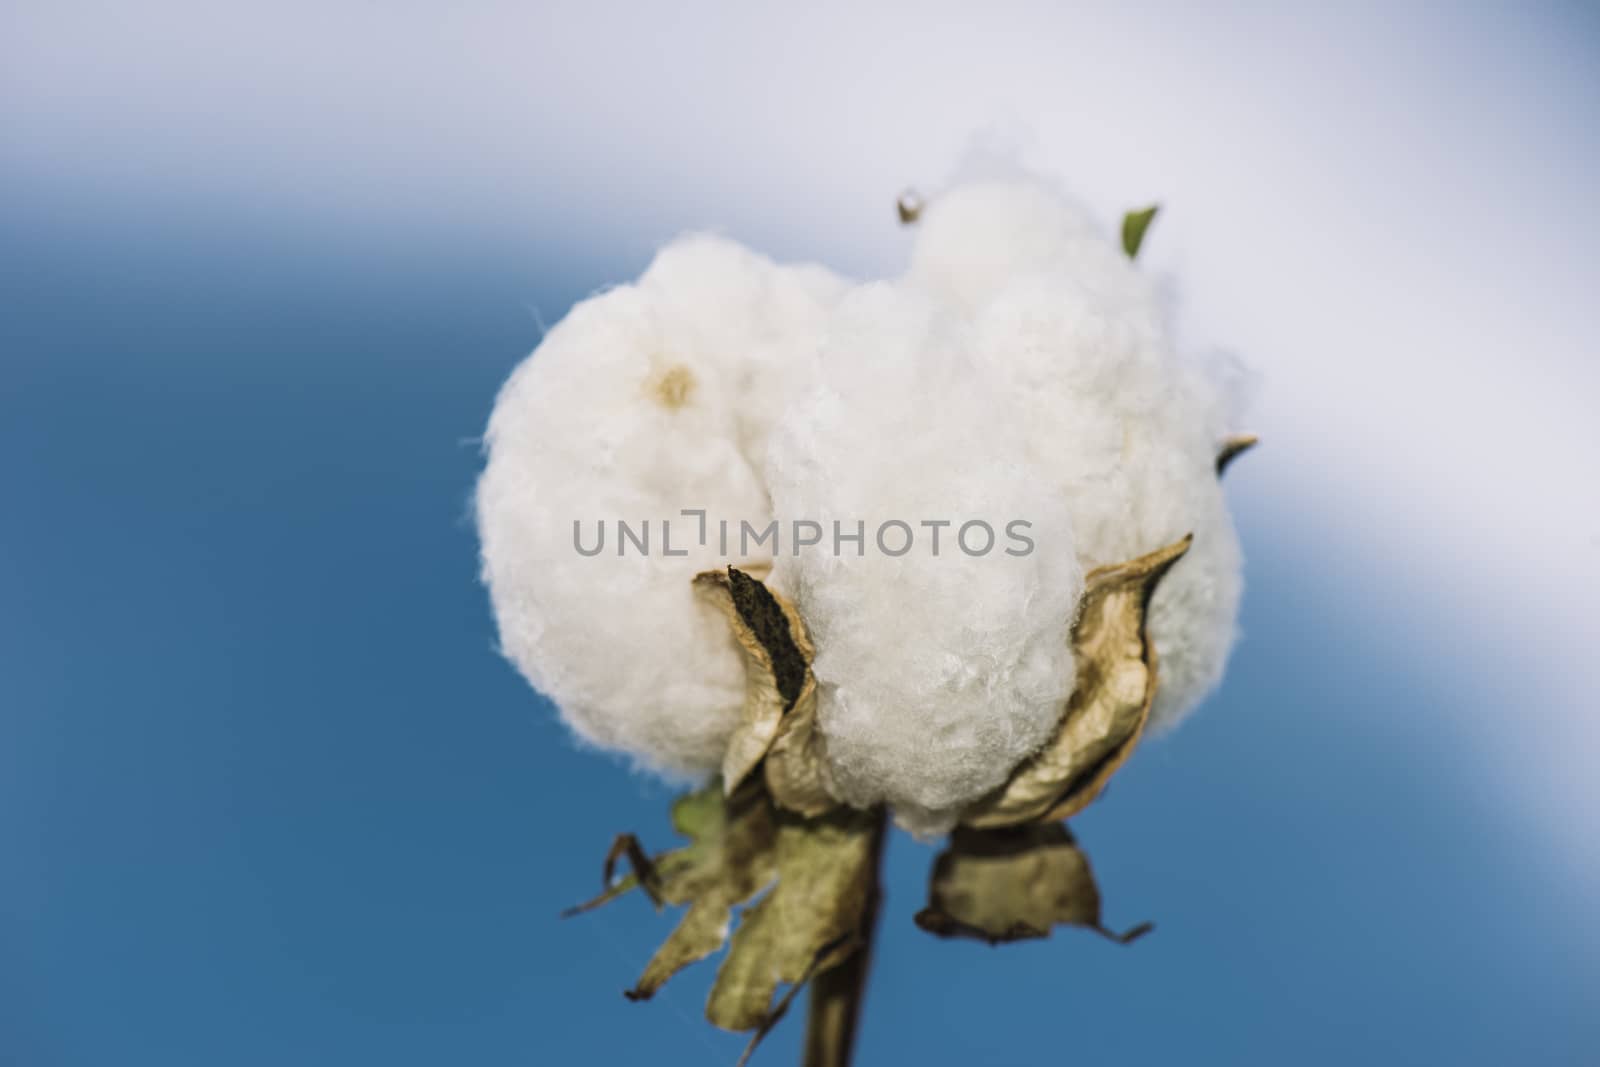 Cotton field in the countryside. by artistrobd